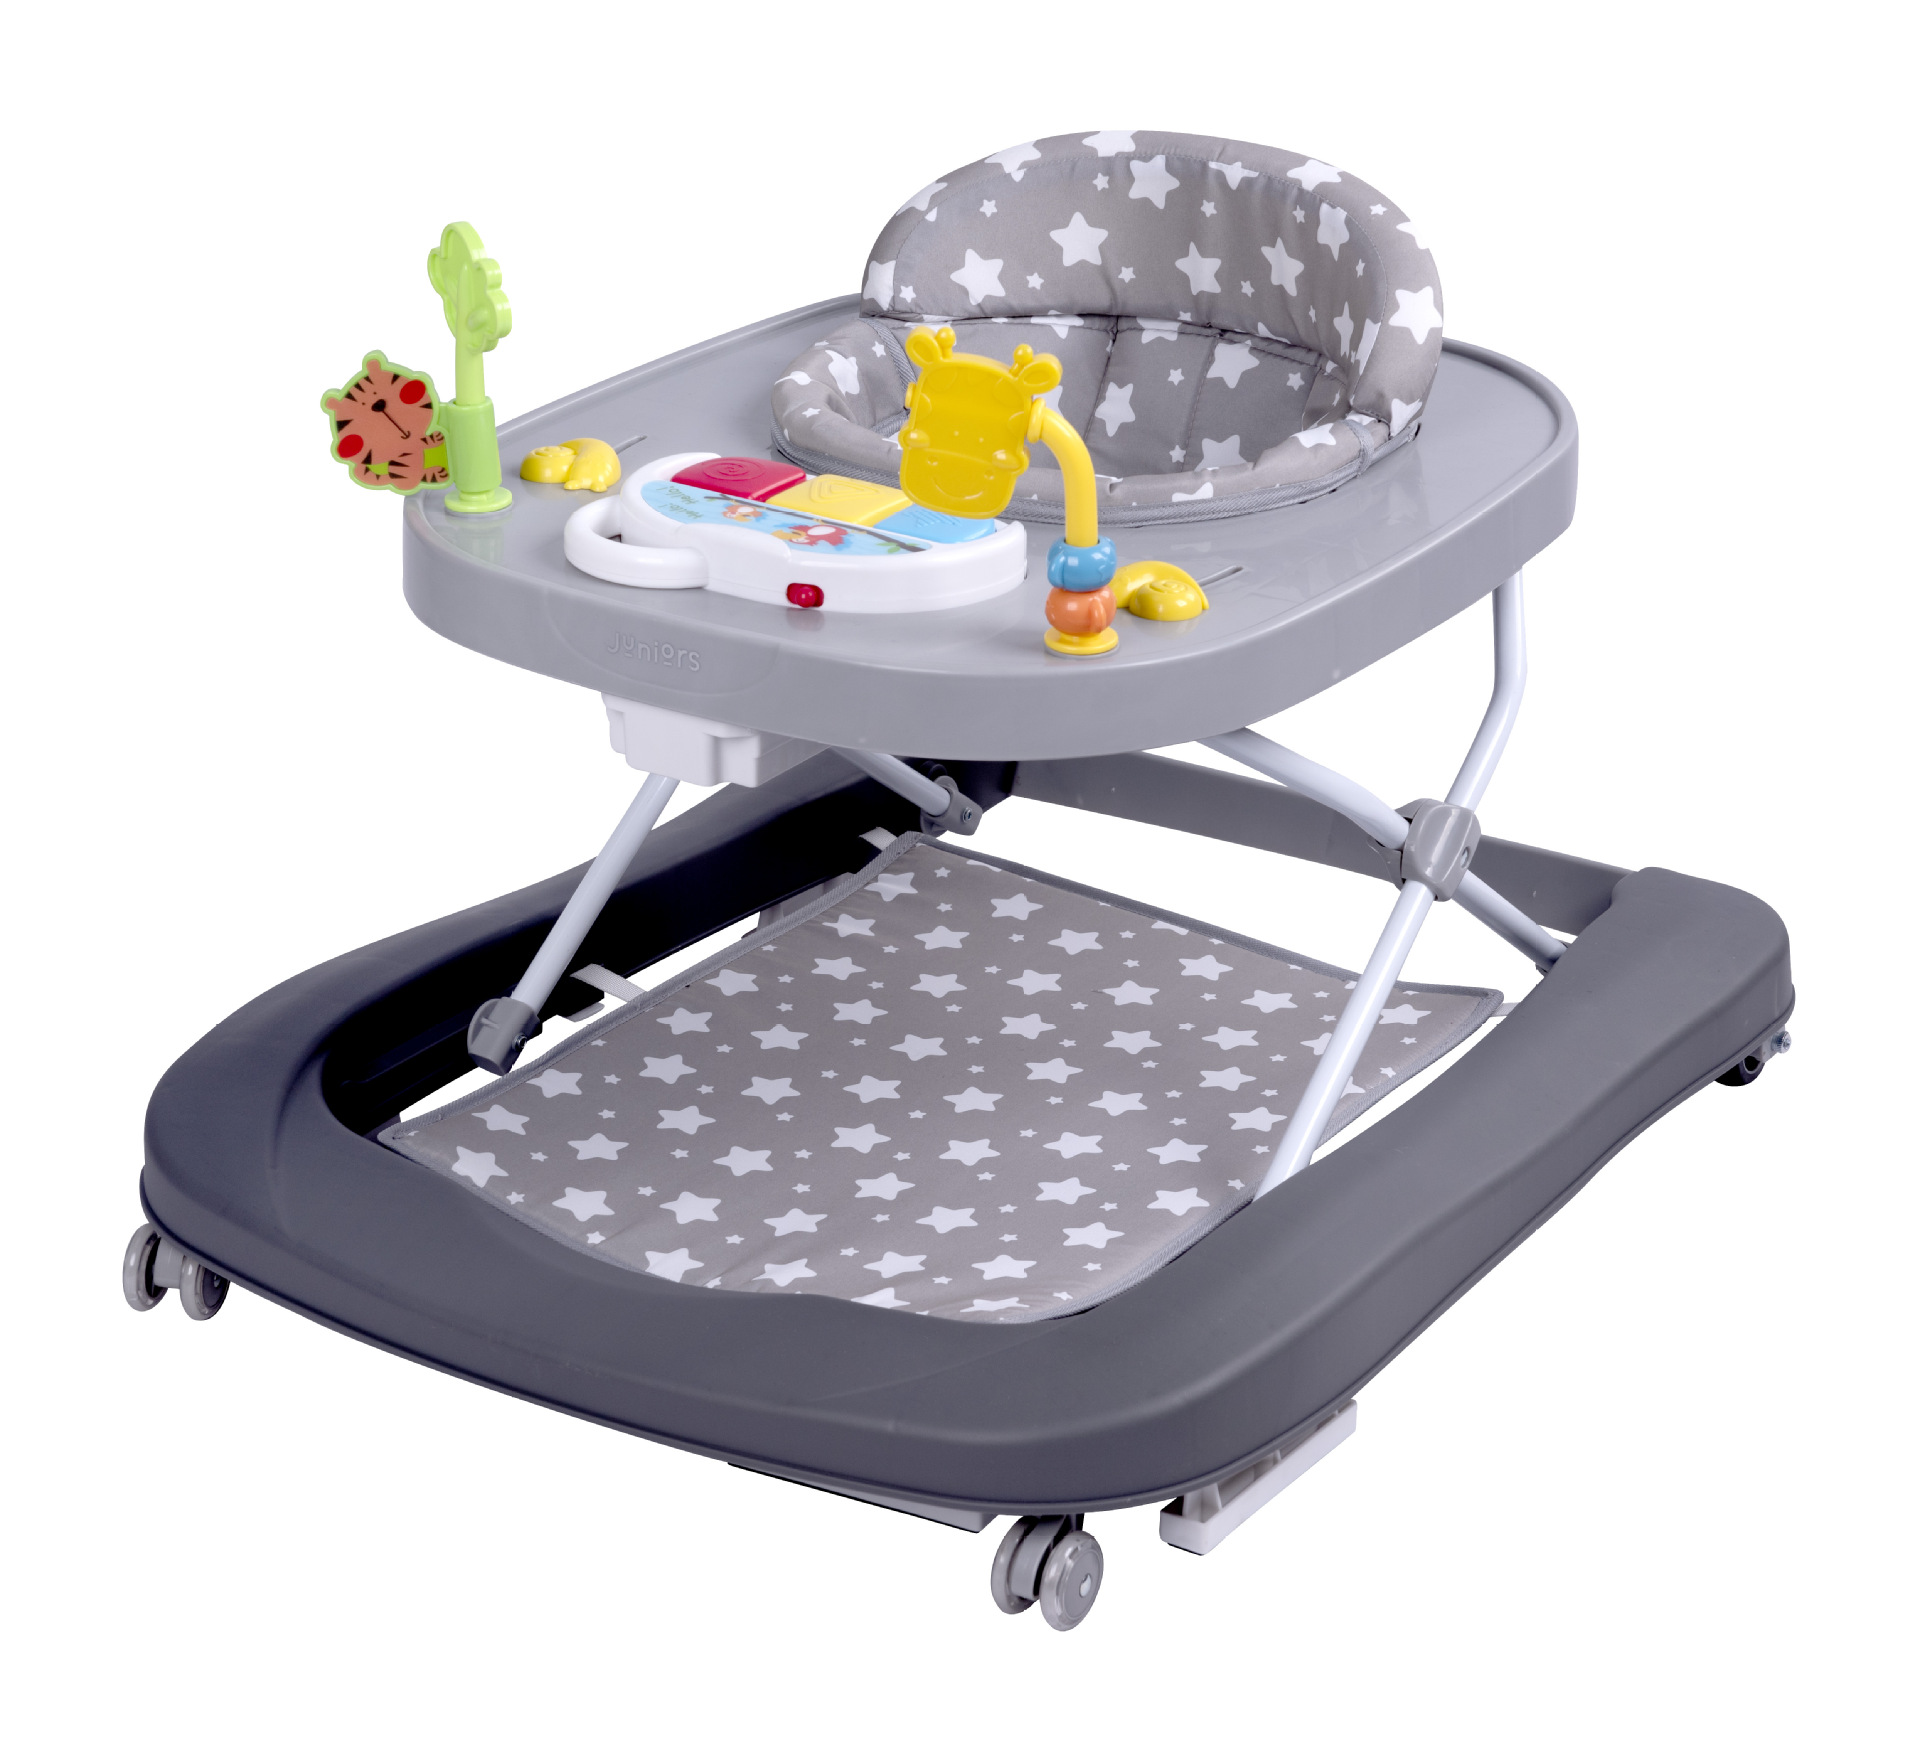 Three Levels of Height Adjustable Baby Walker with Multiple Functions